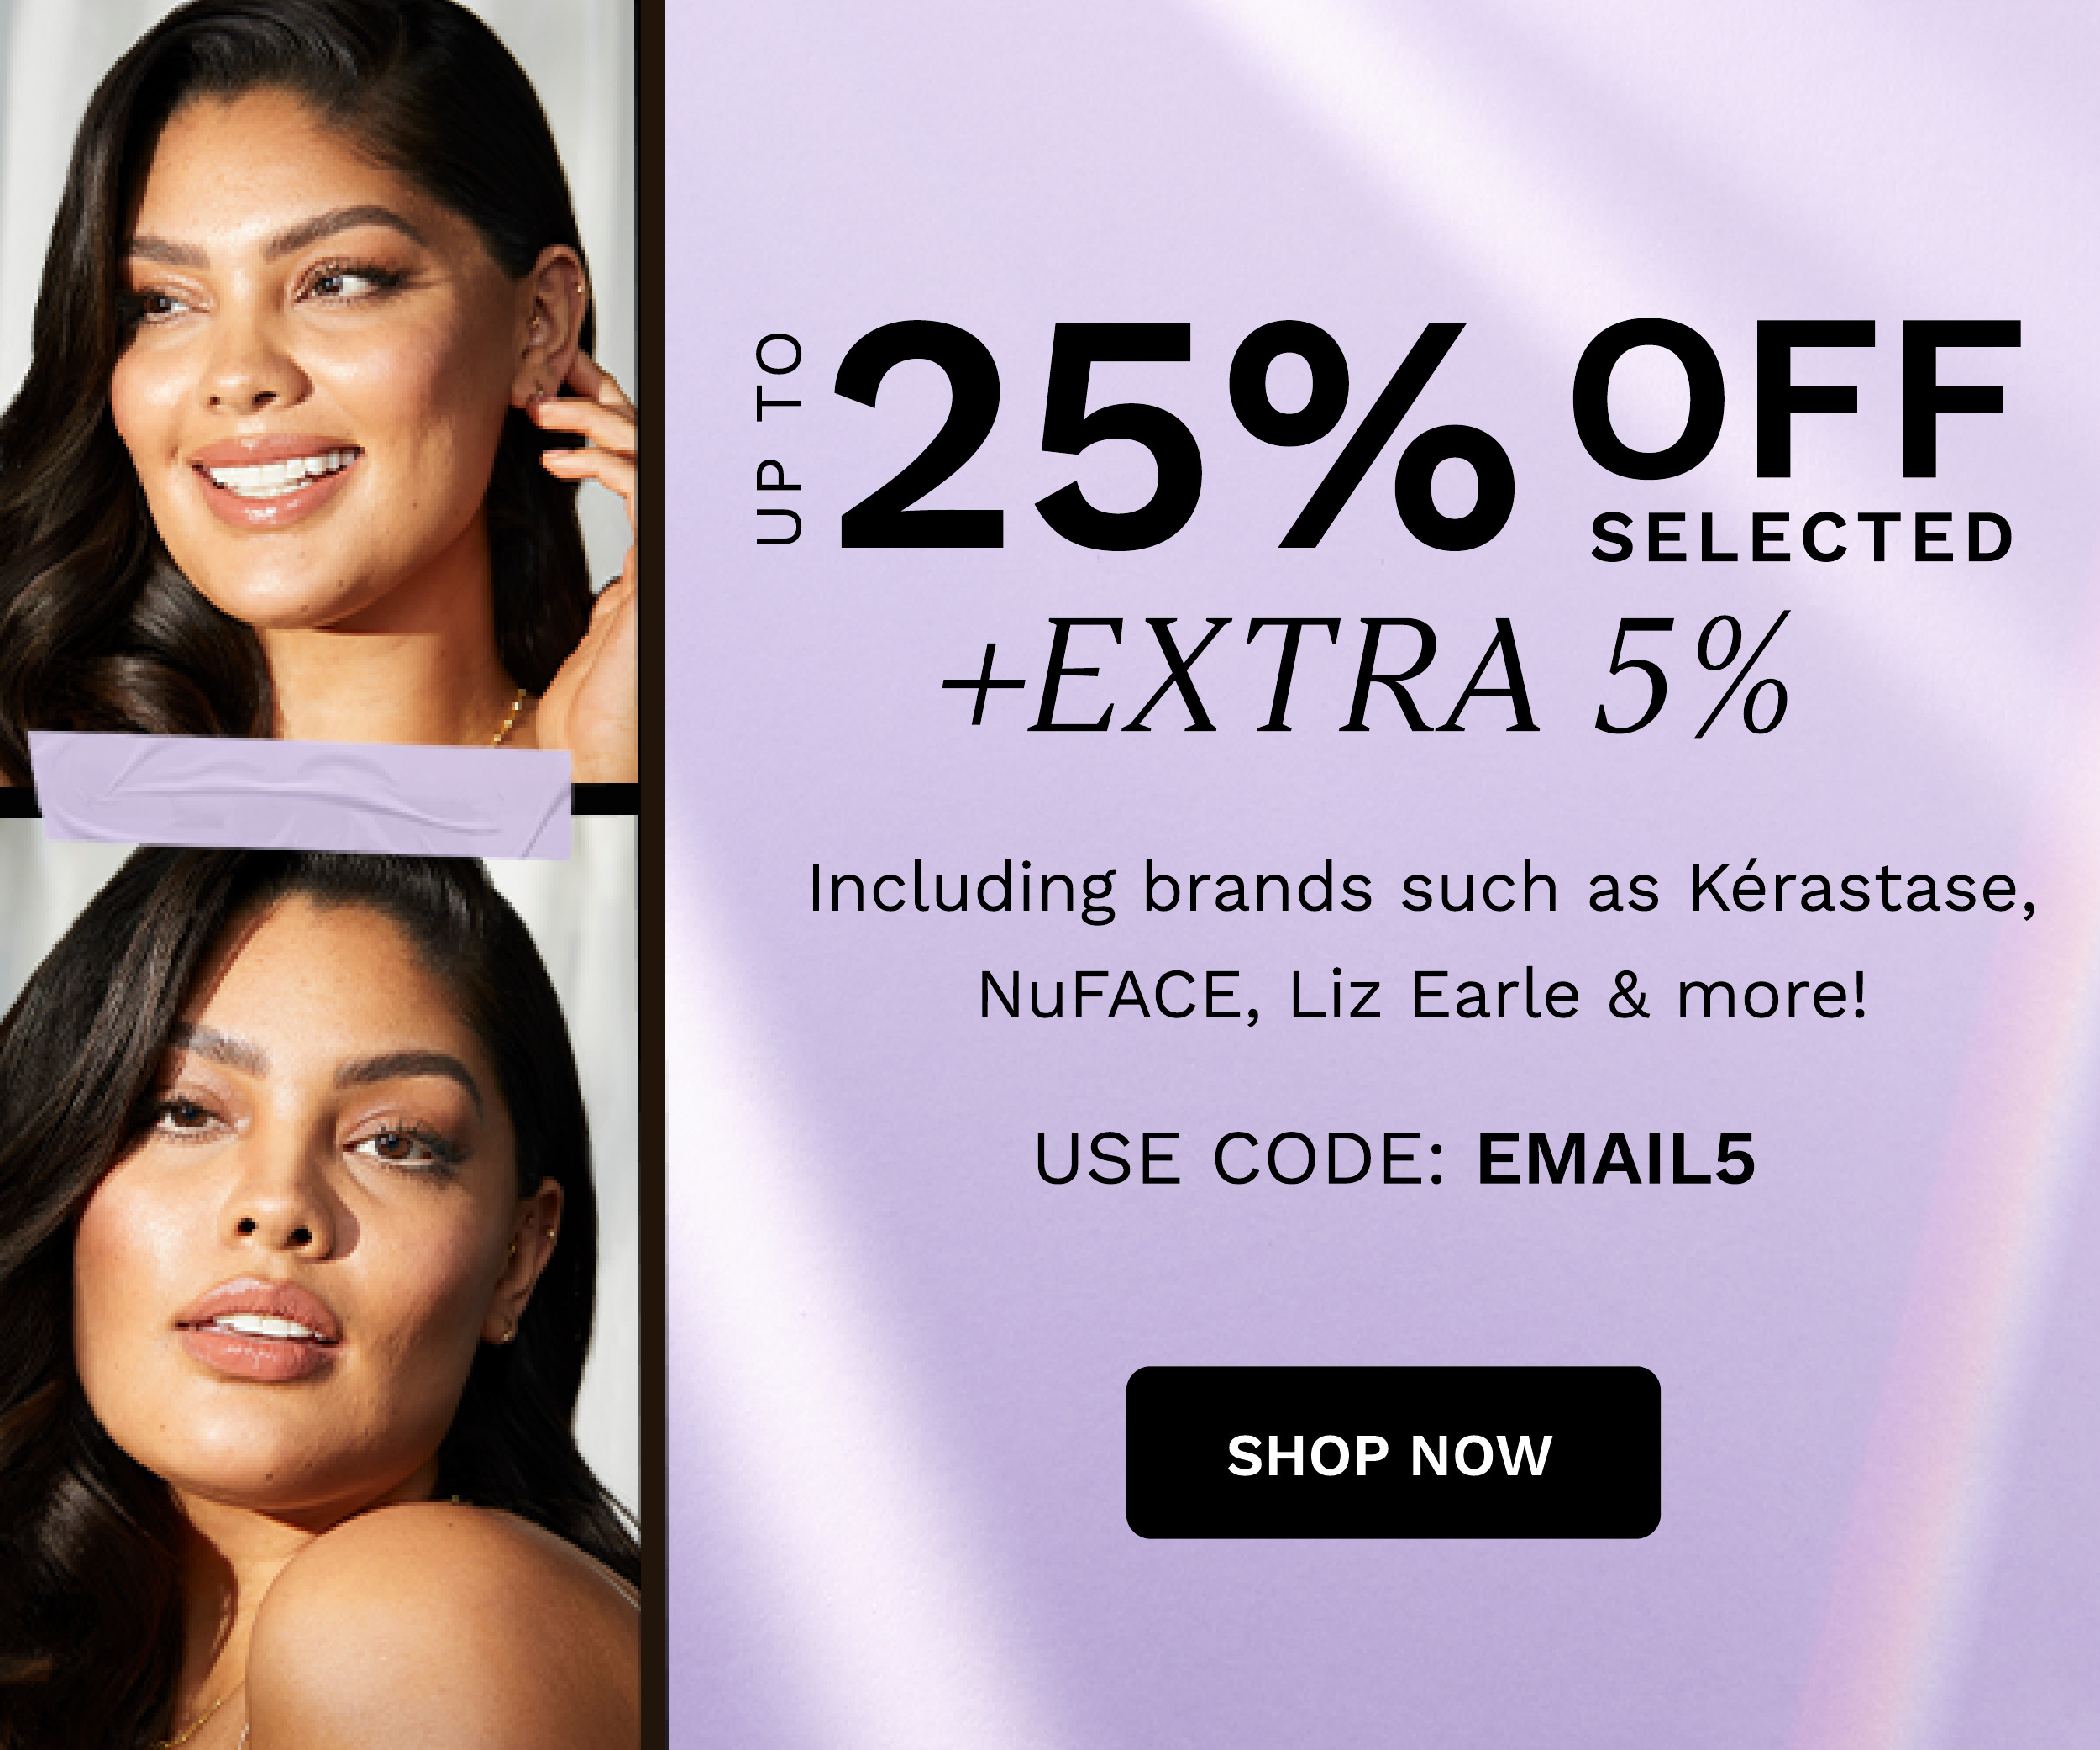 UP TO 25% OFF EXTRA 5% Including brands such as Kerastase, NuFACE, Liz Earle more! USE CODE: EMAILS SHOP NOW 